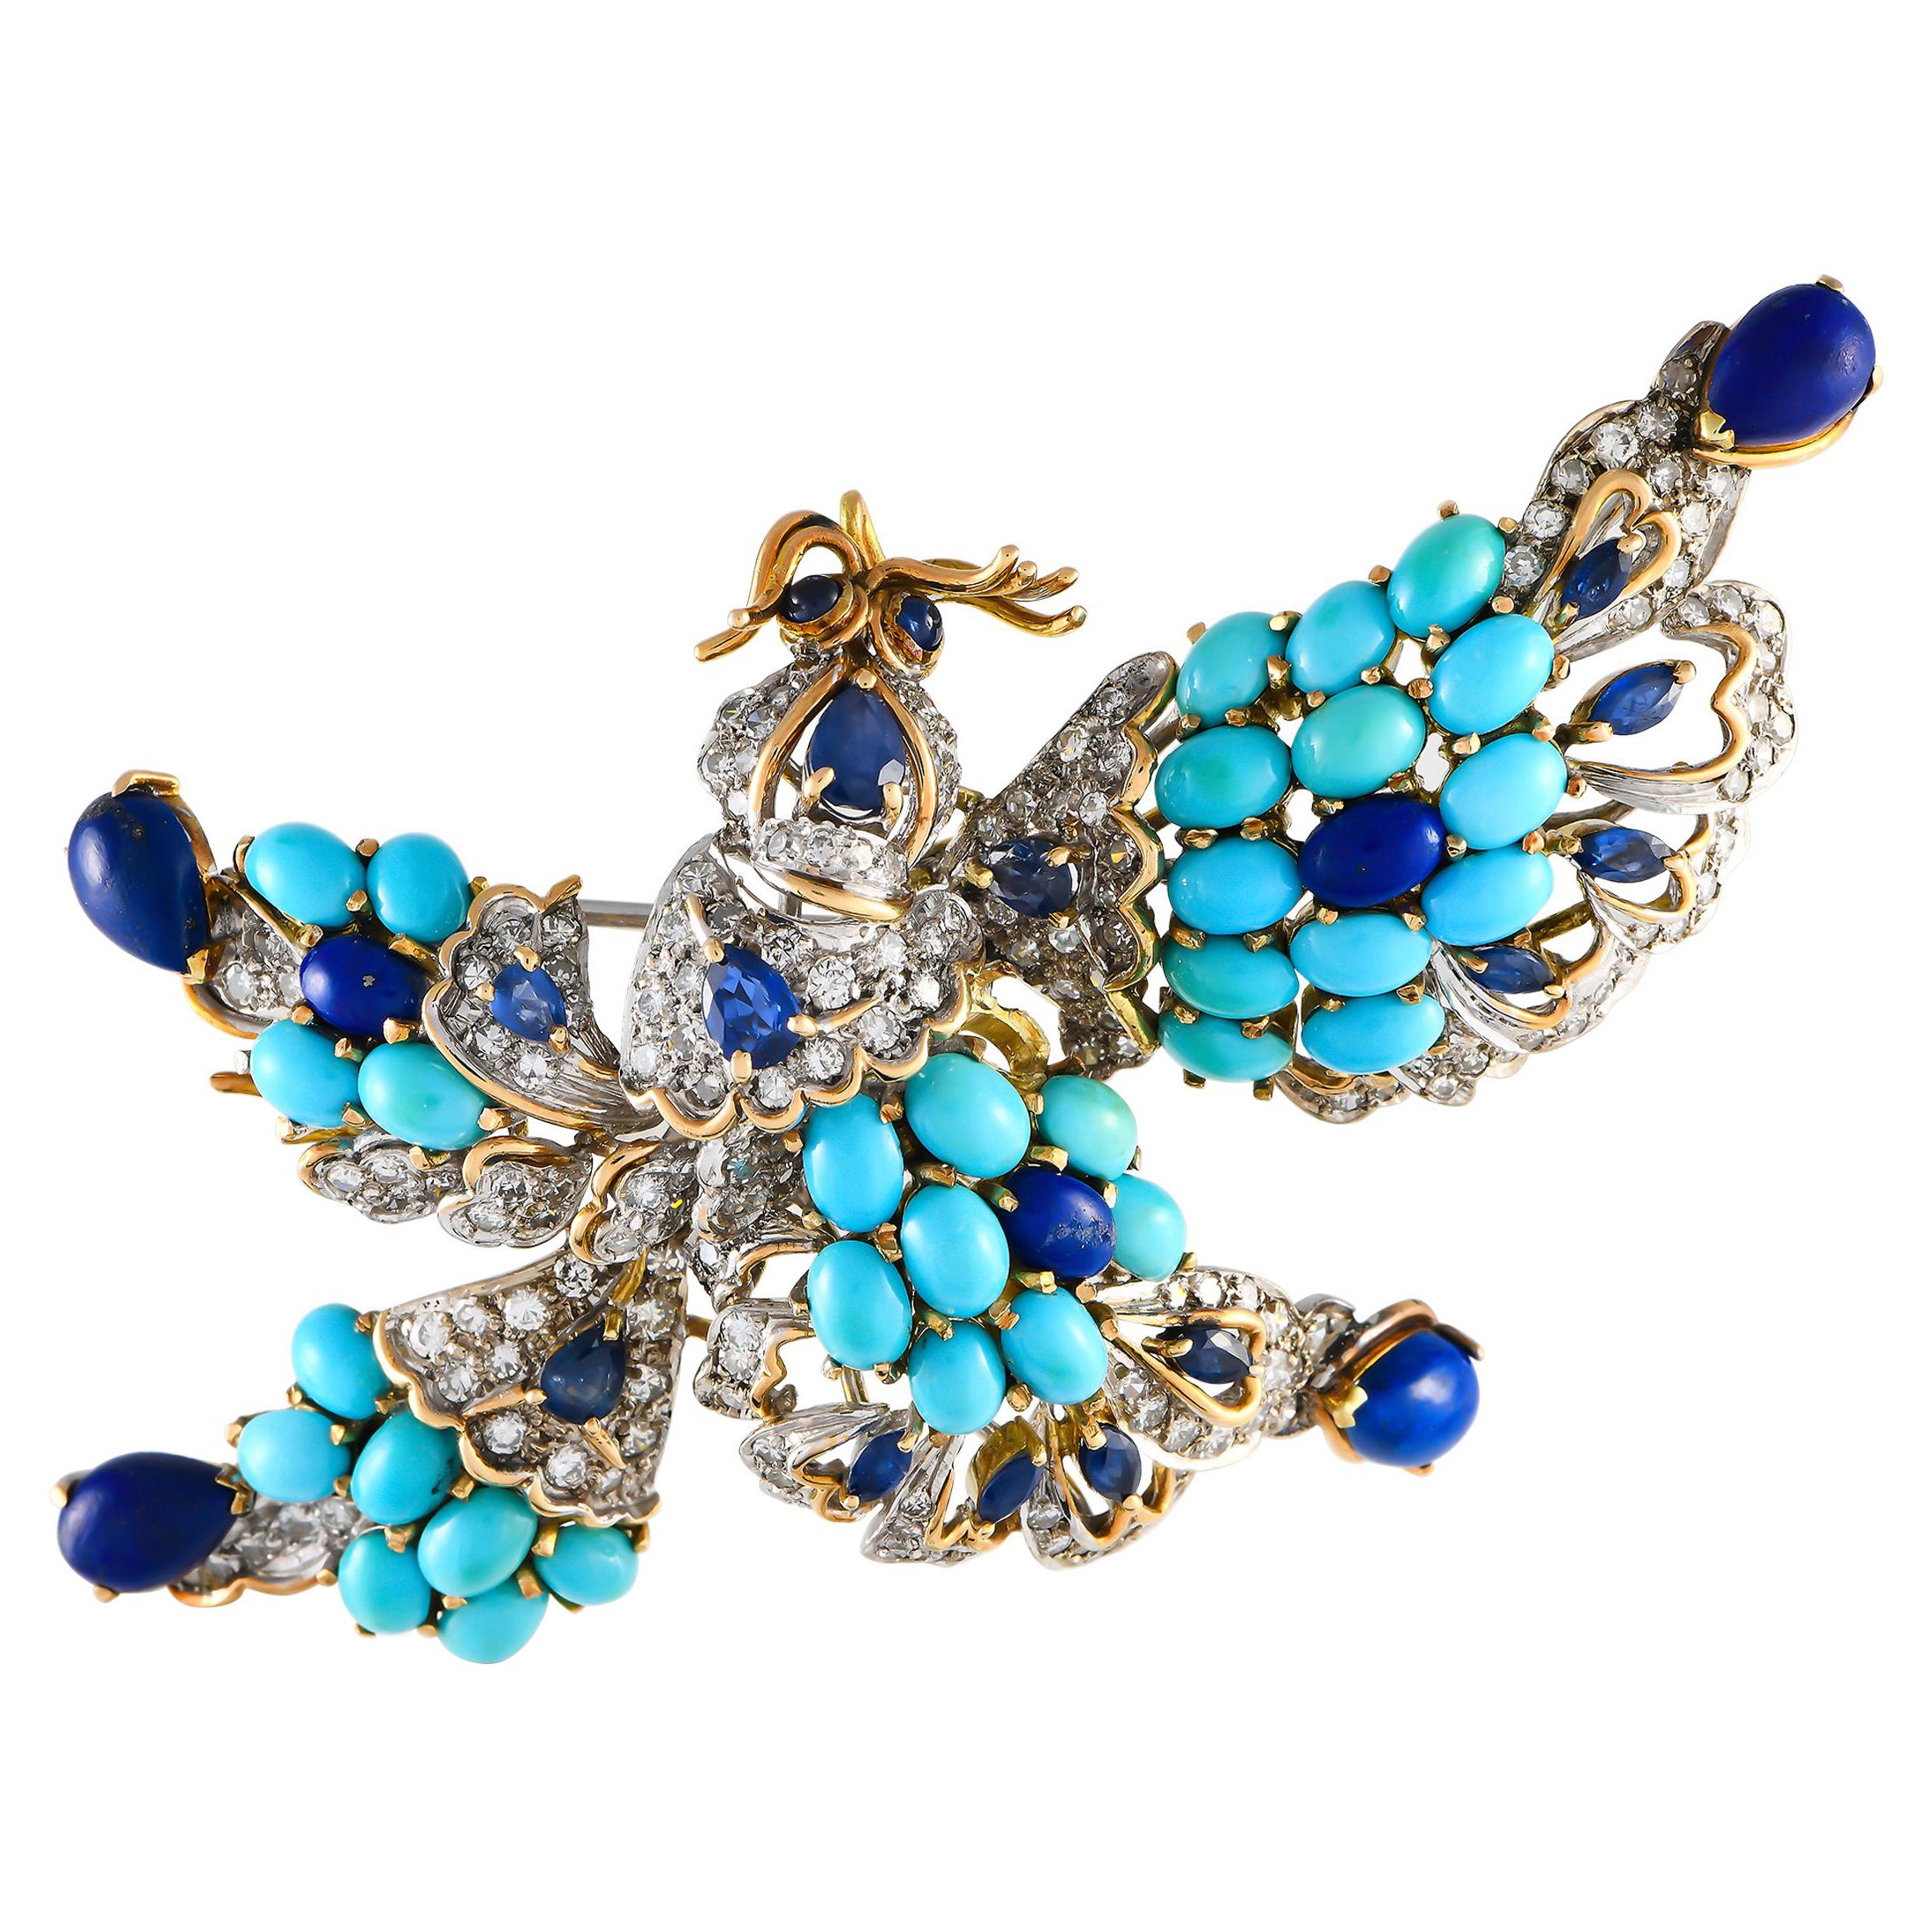 14K White and Yellow Gold 4.06ct Diamond, Lapis, and Turquoise Brooch